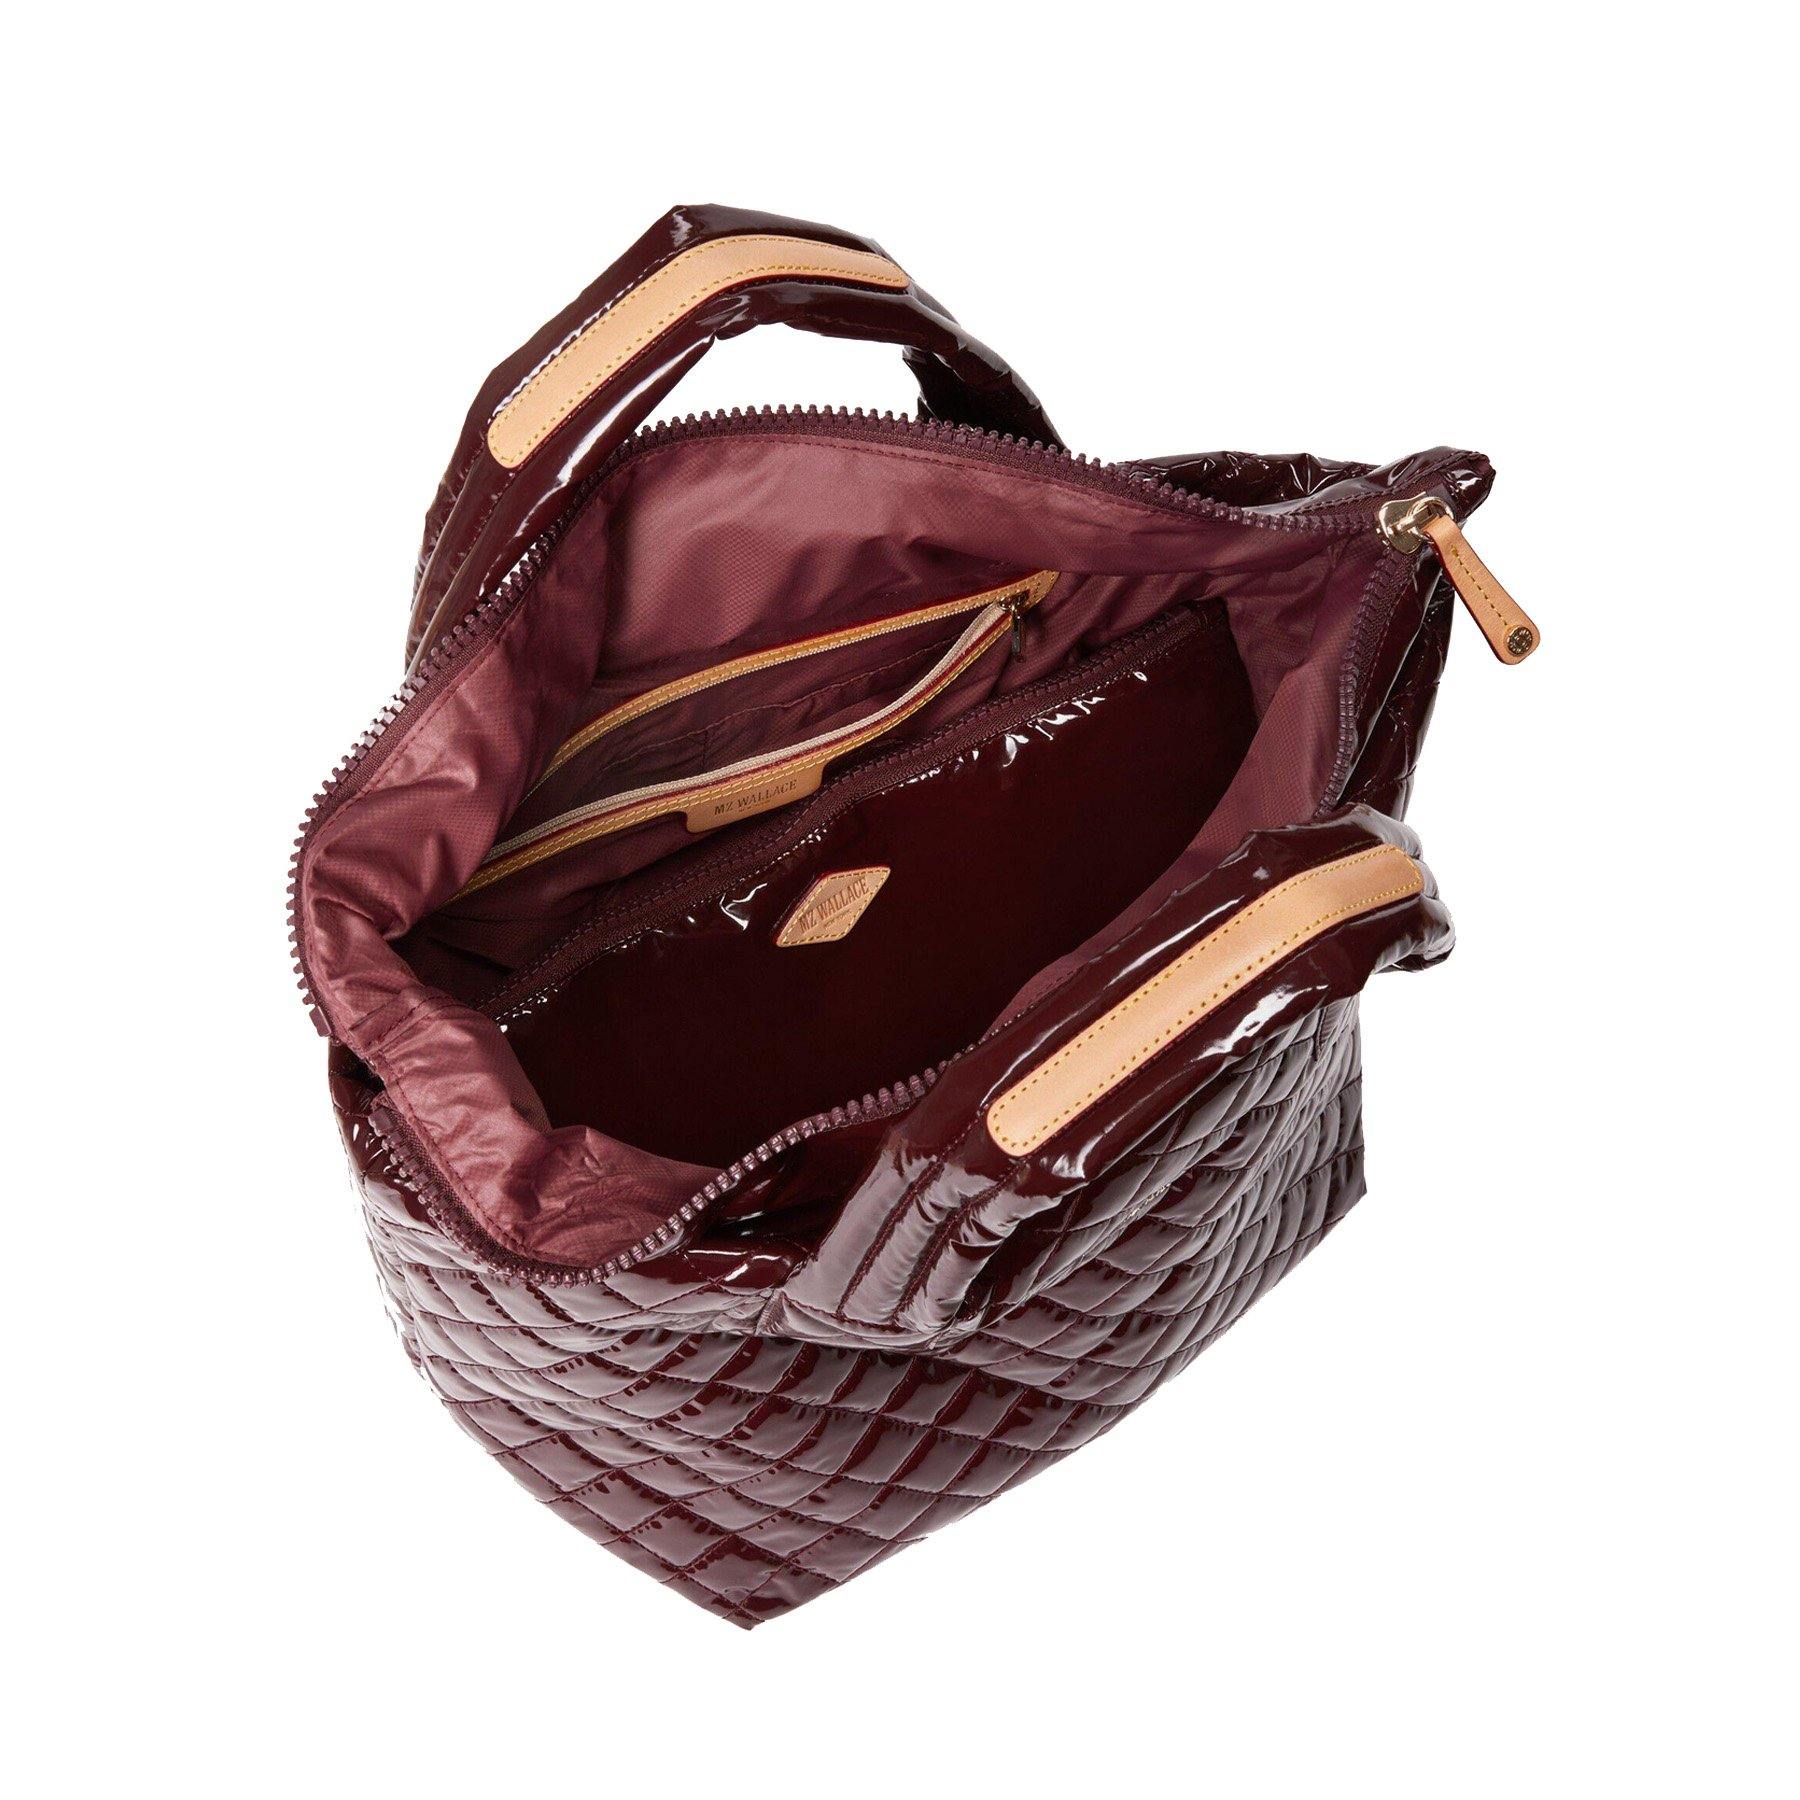 Metro Tote Small - Cosmos Boutique New Jersey